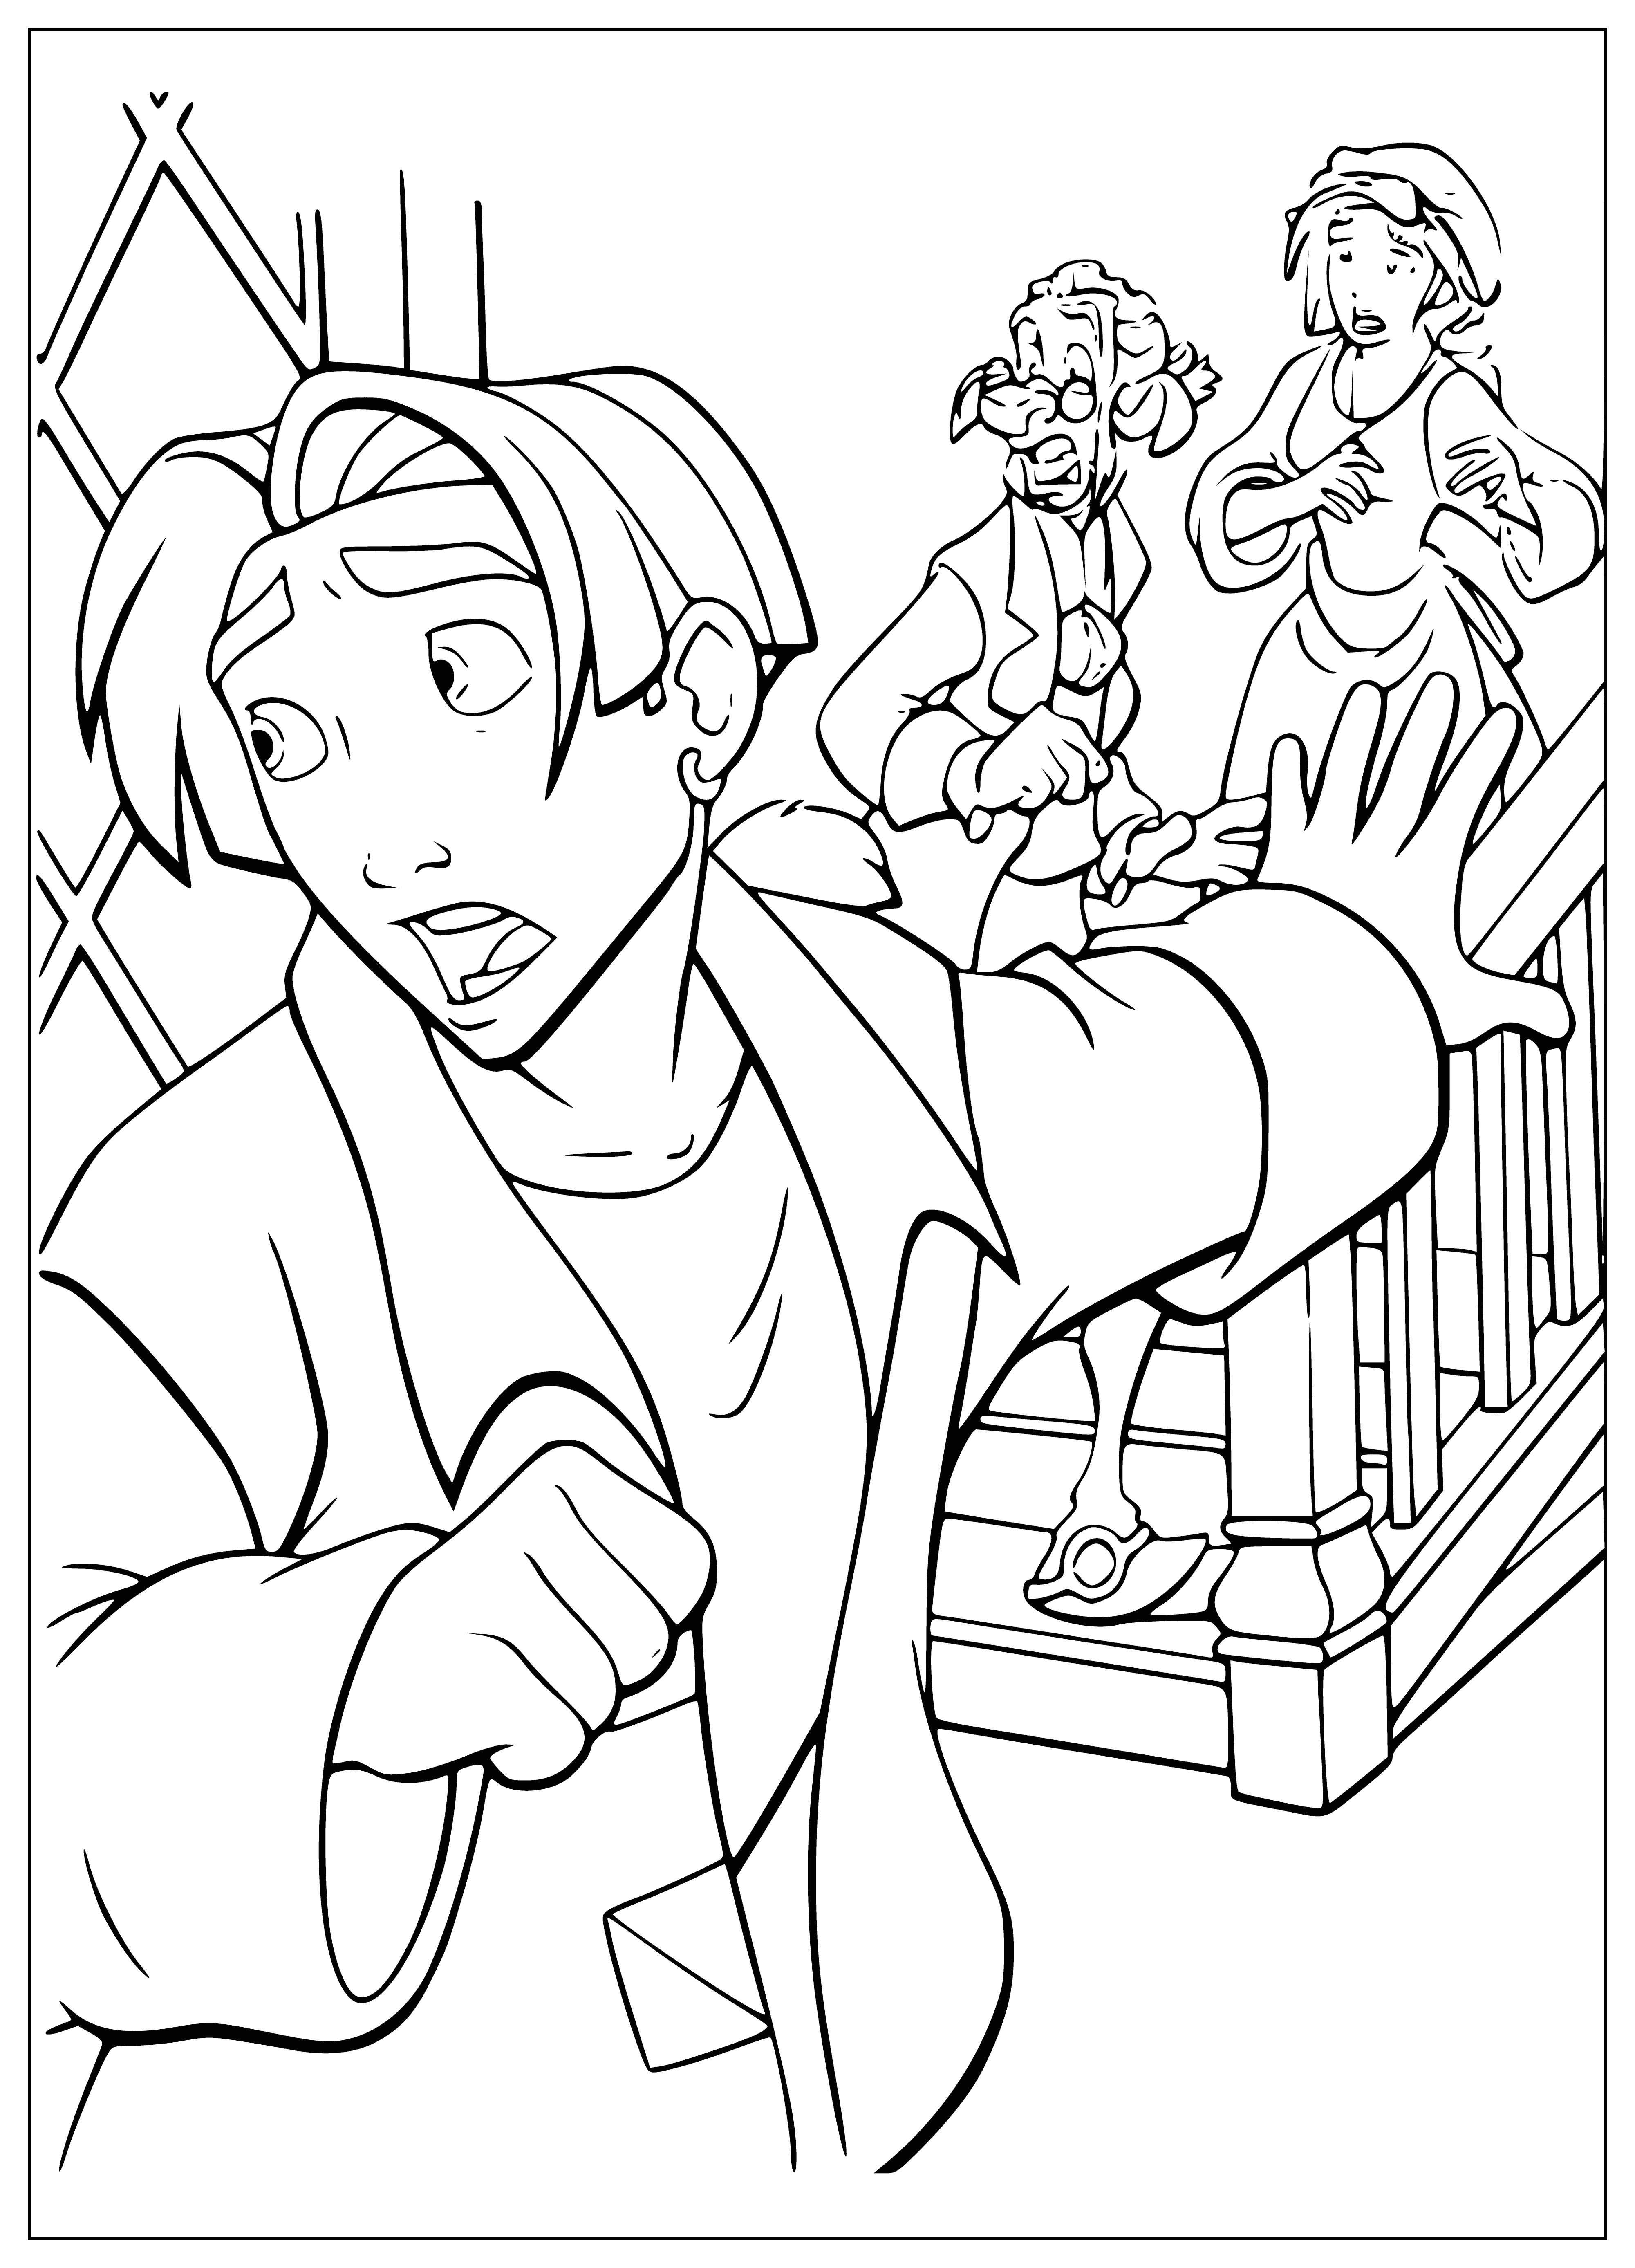 coloring page: 3 people in command ctr, 4 people in spacecraft, they look out windows. Planet in background.